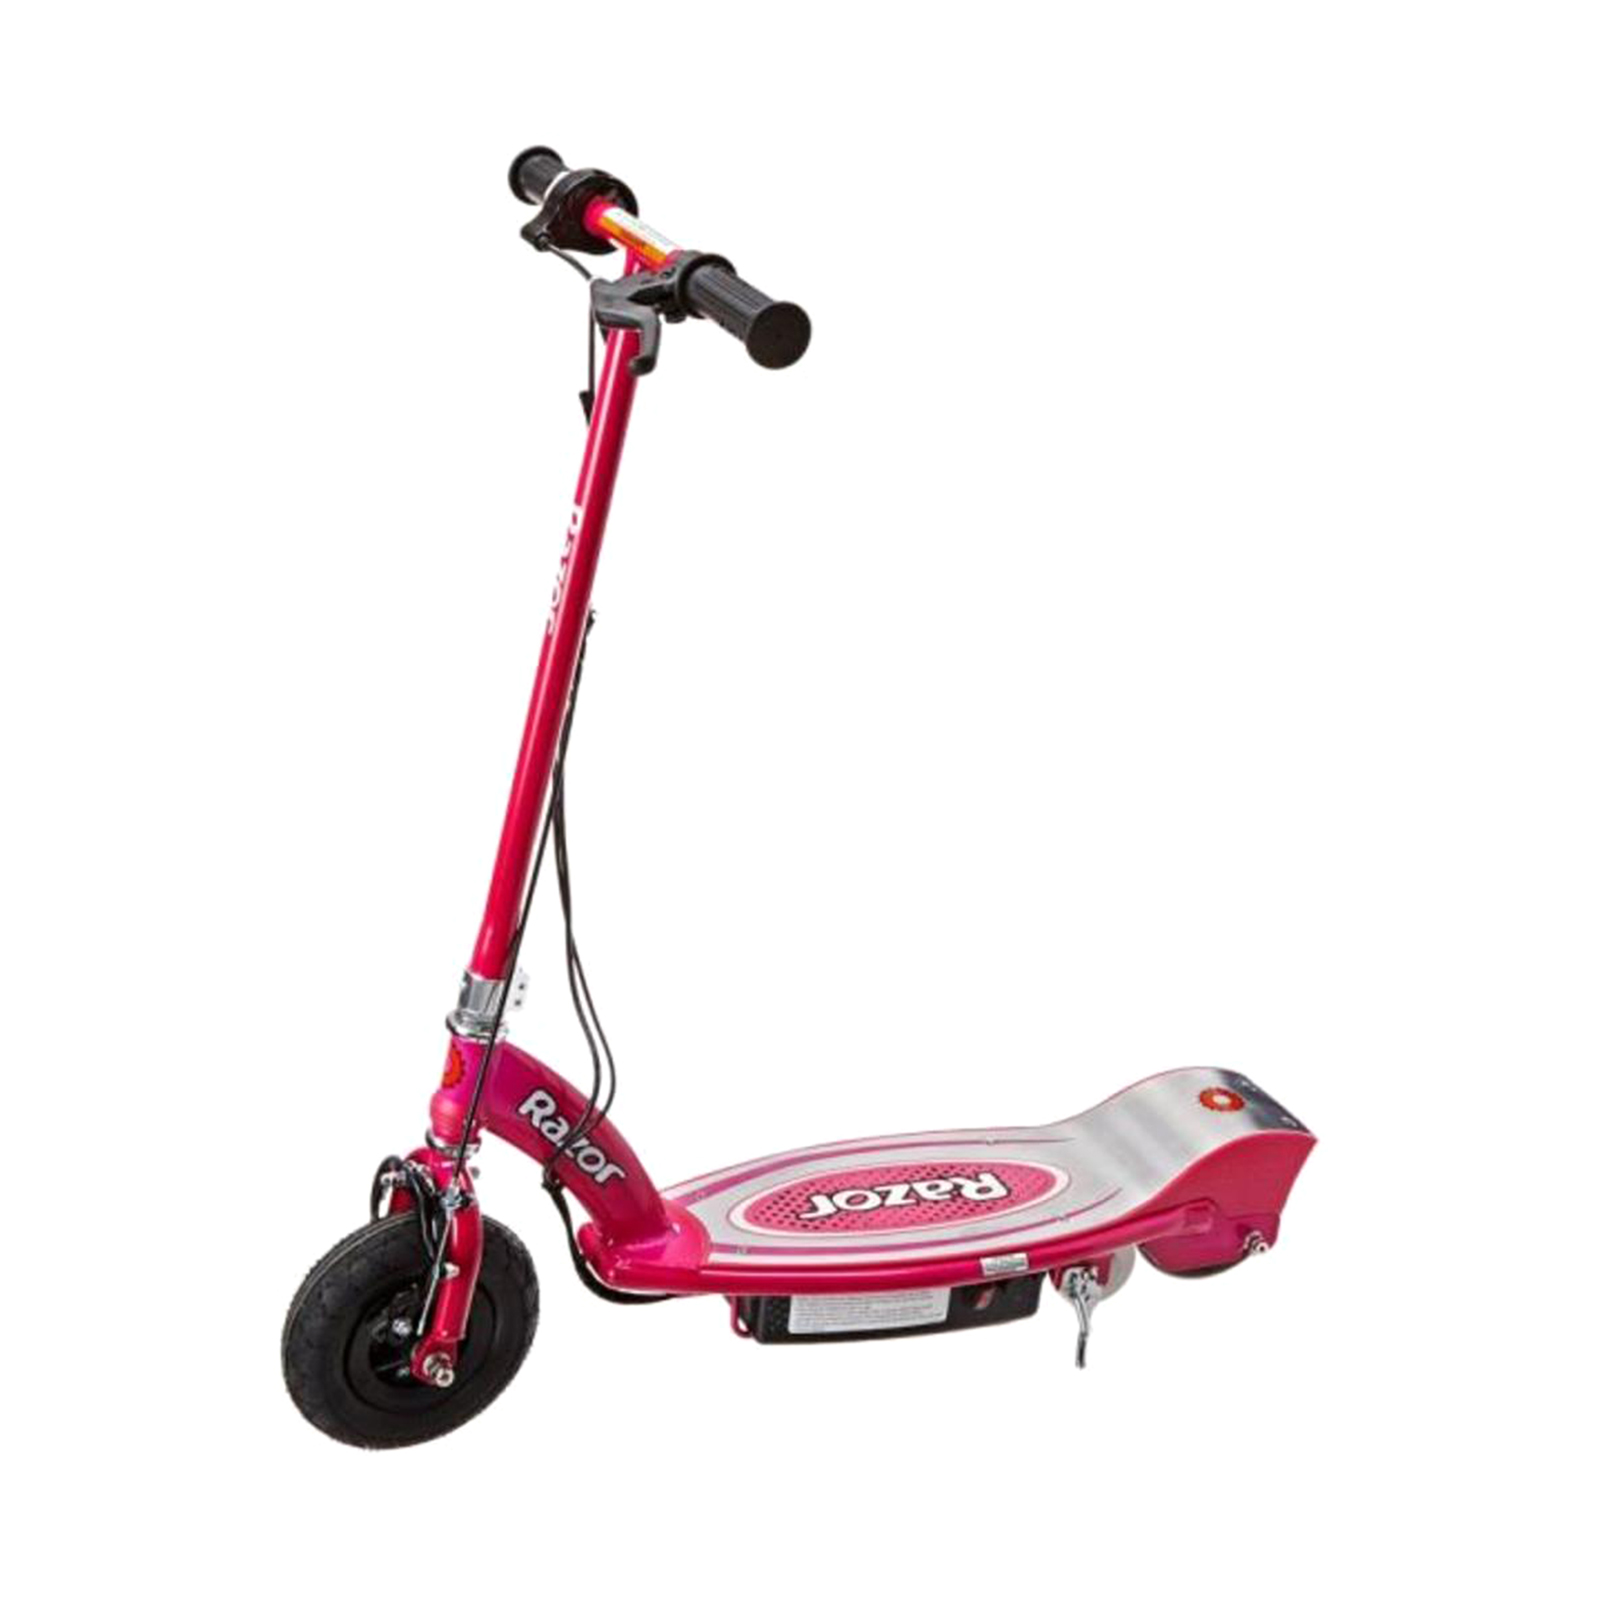 Razor&trade; Razor&trade E100 24V Electric Scooter with Charger - Pink